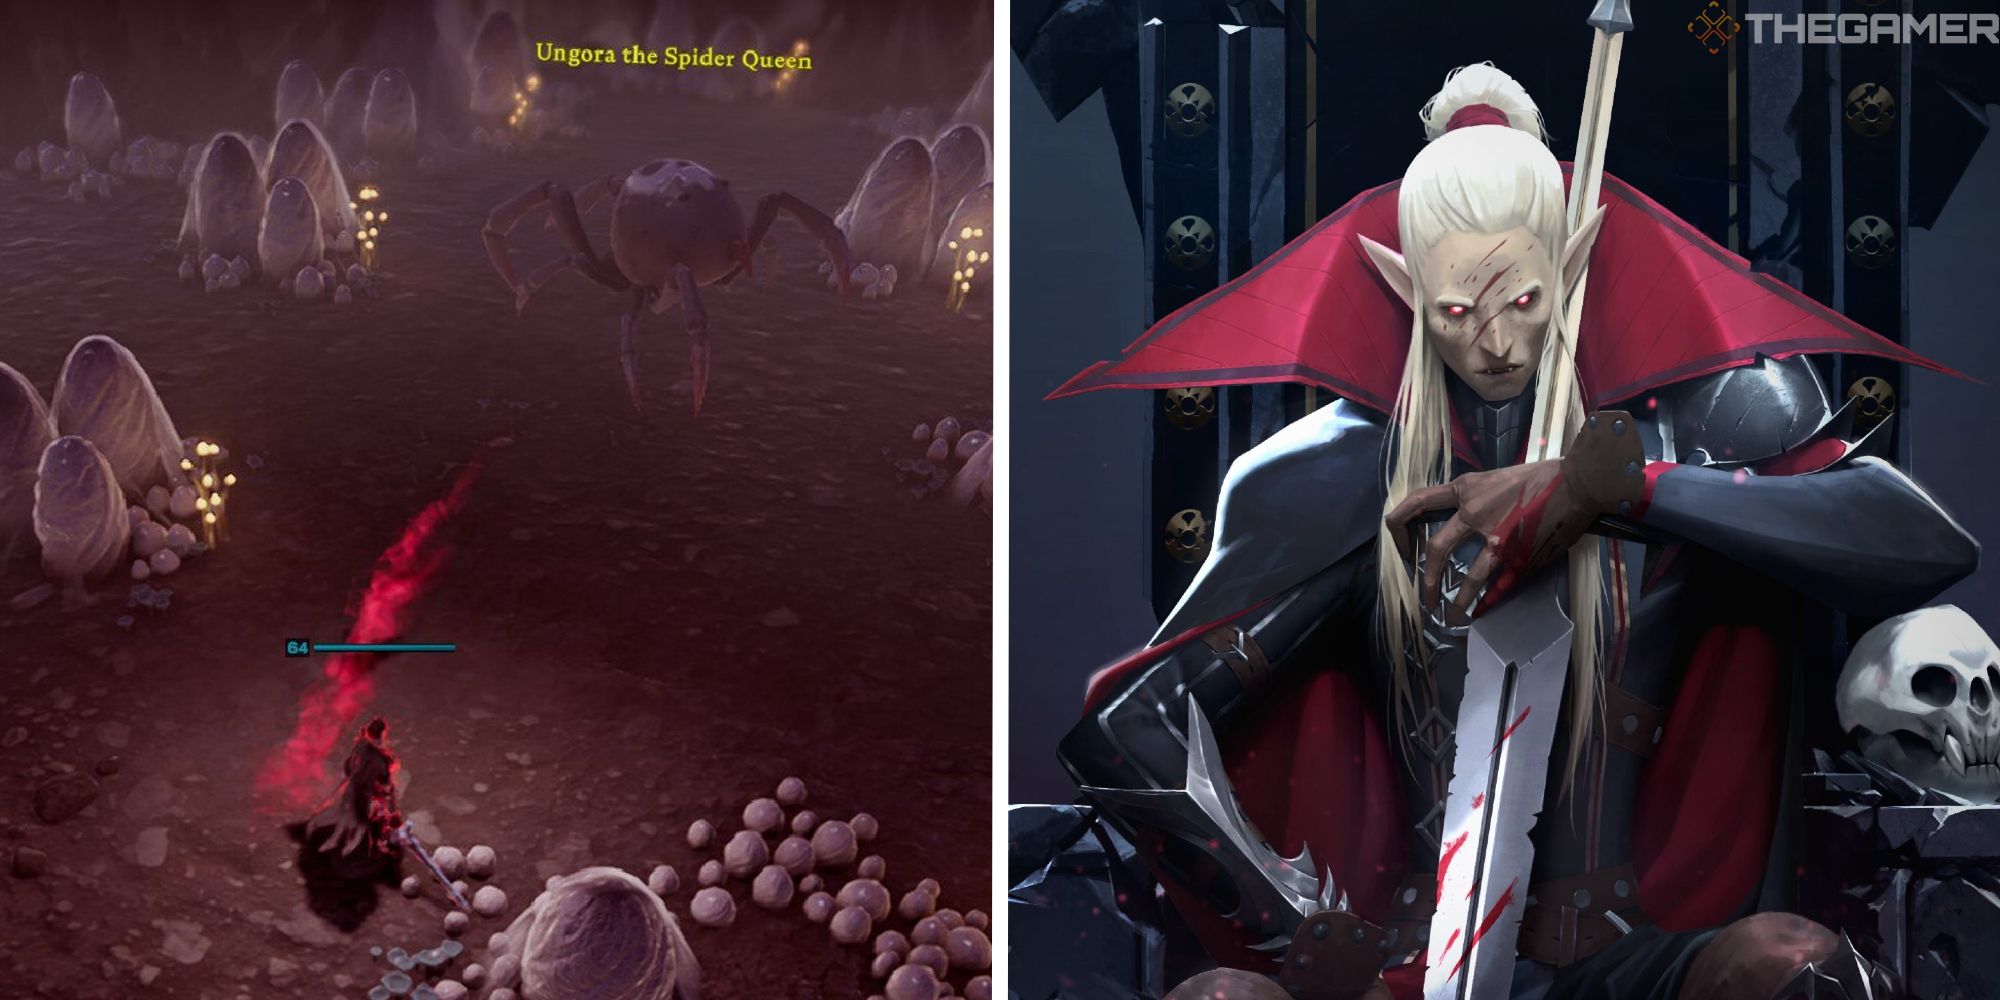 image of player facing ungora the spider queen next to promotional art for v rising